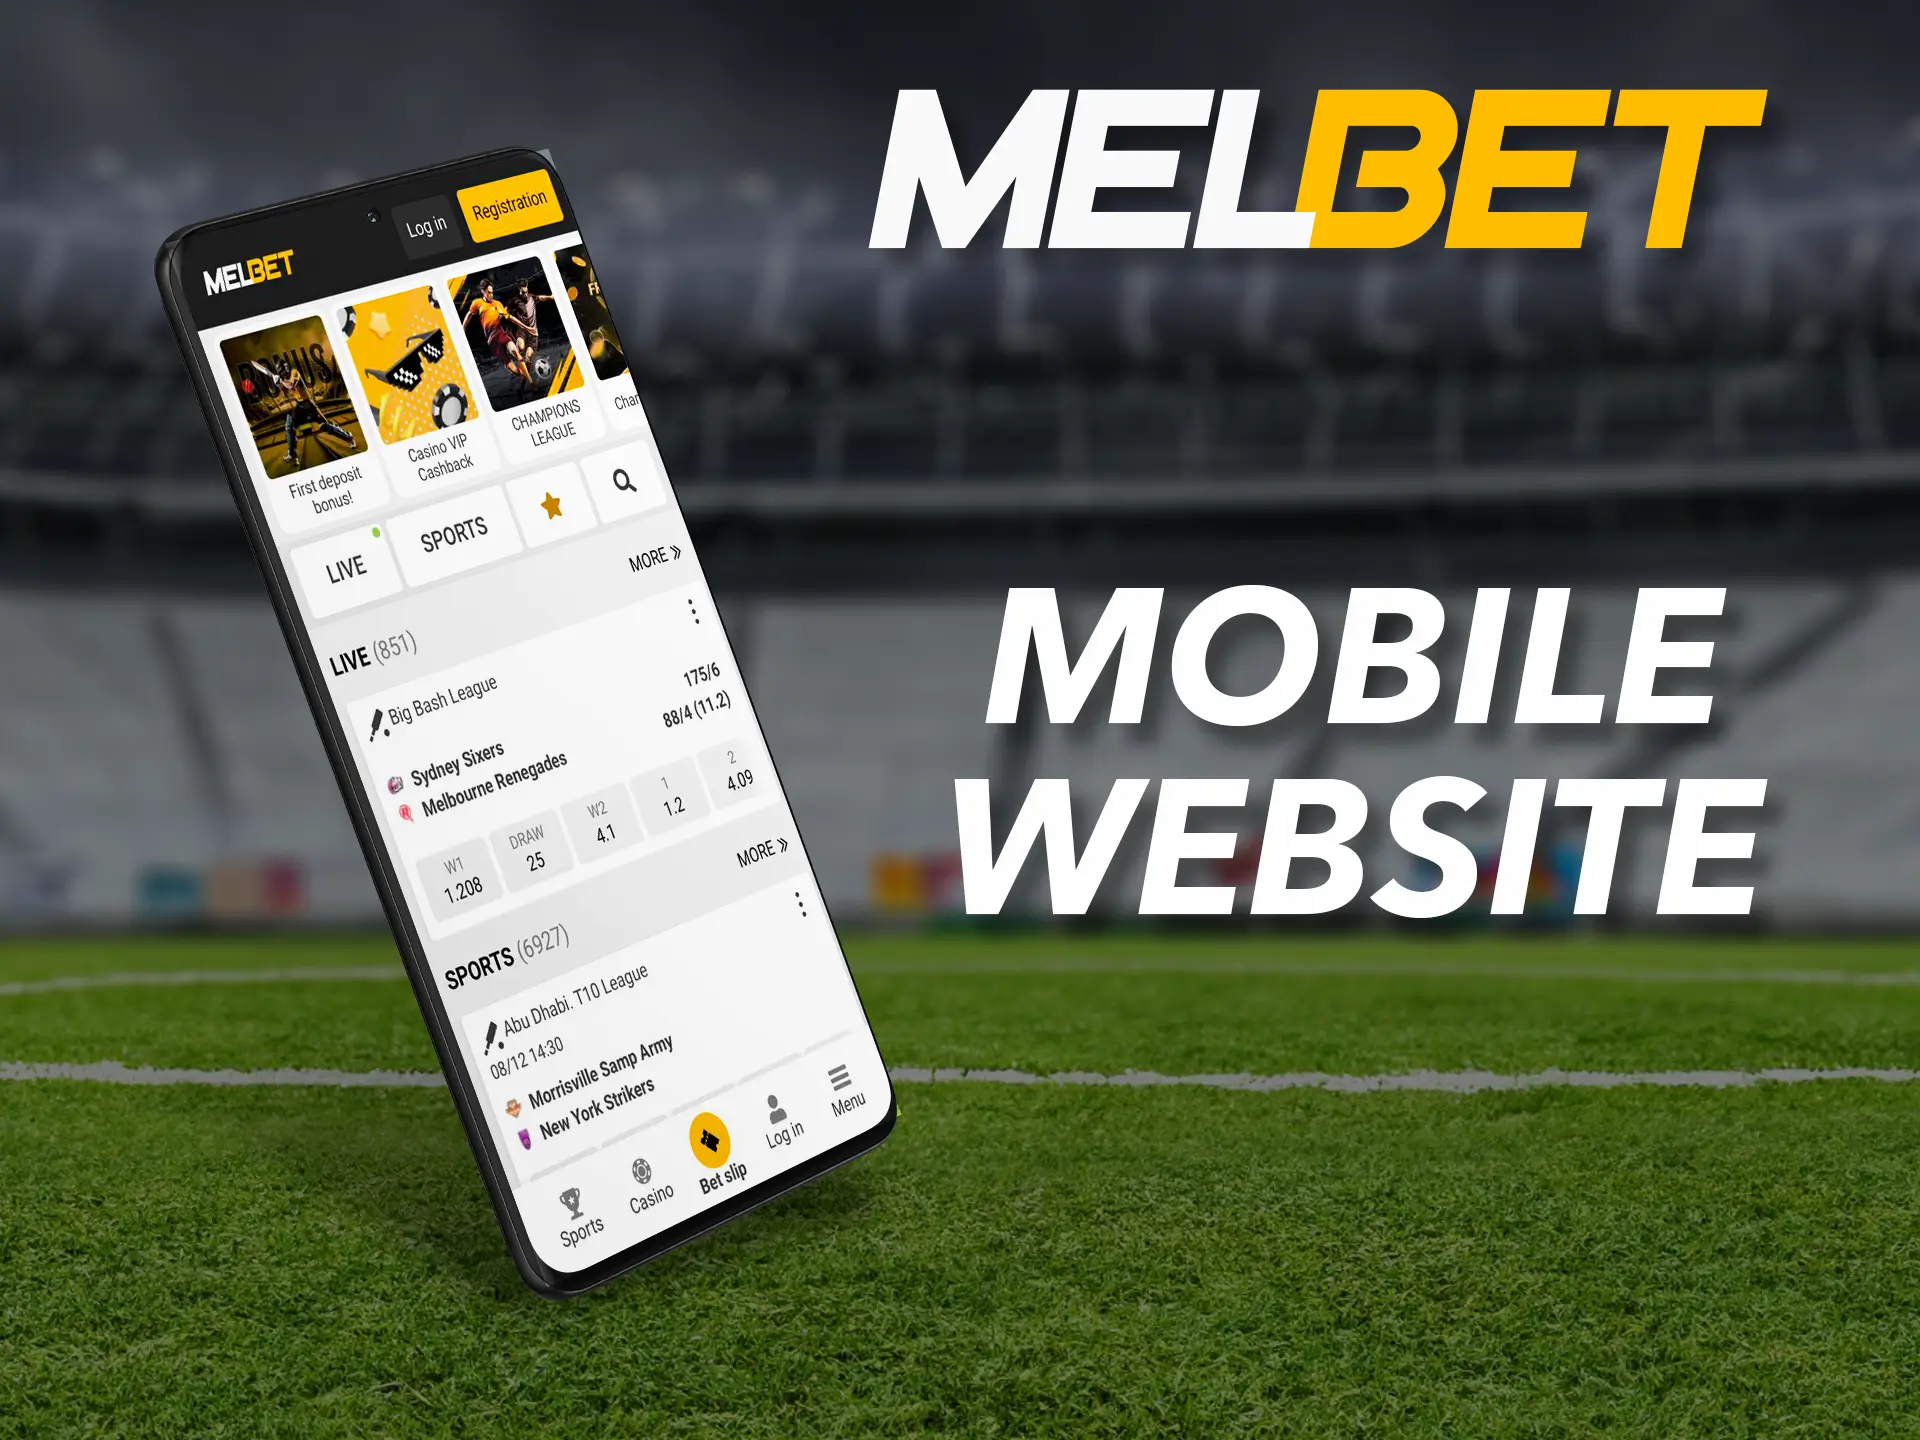 The Melbet website adapts perfectly and works on any mobile browser.